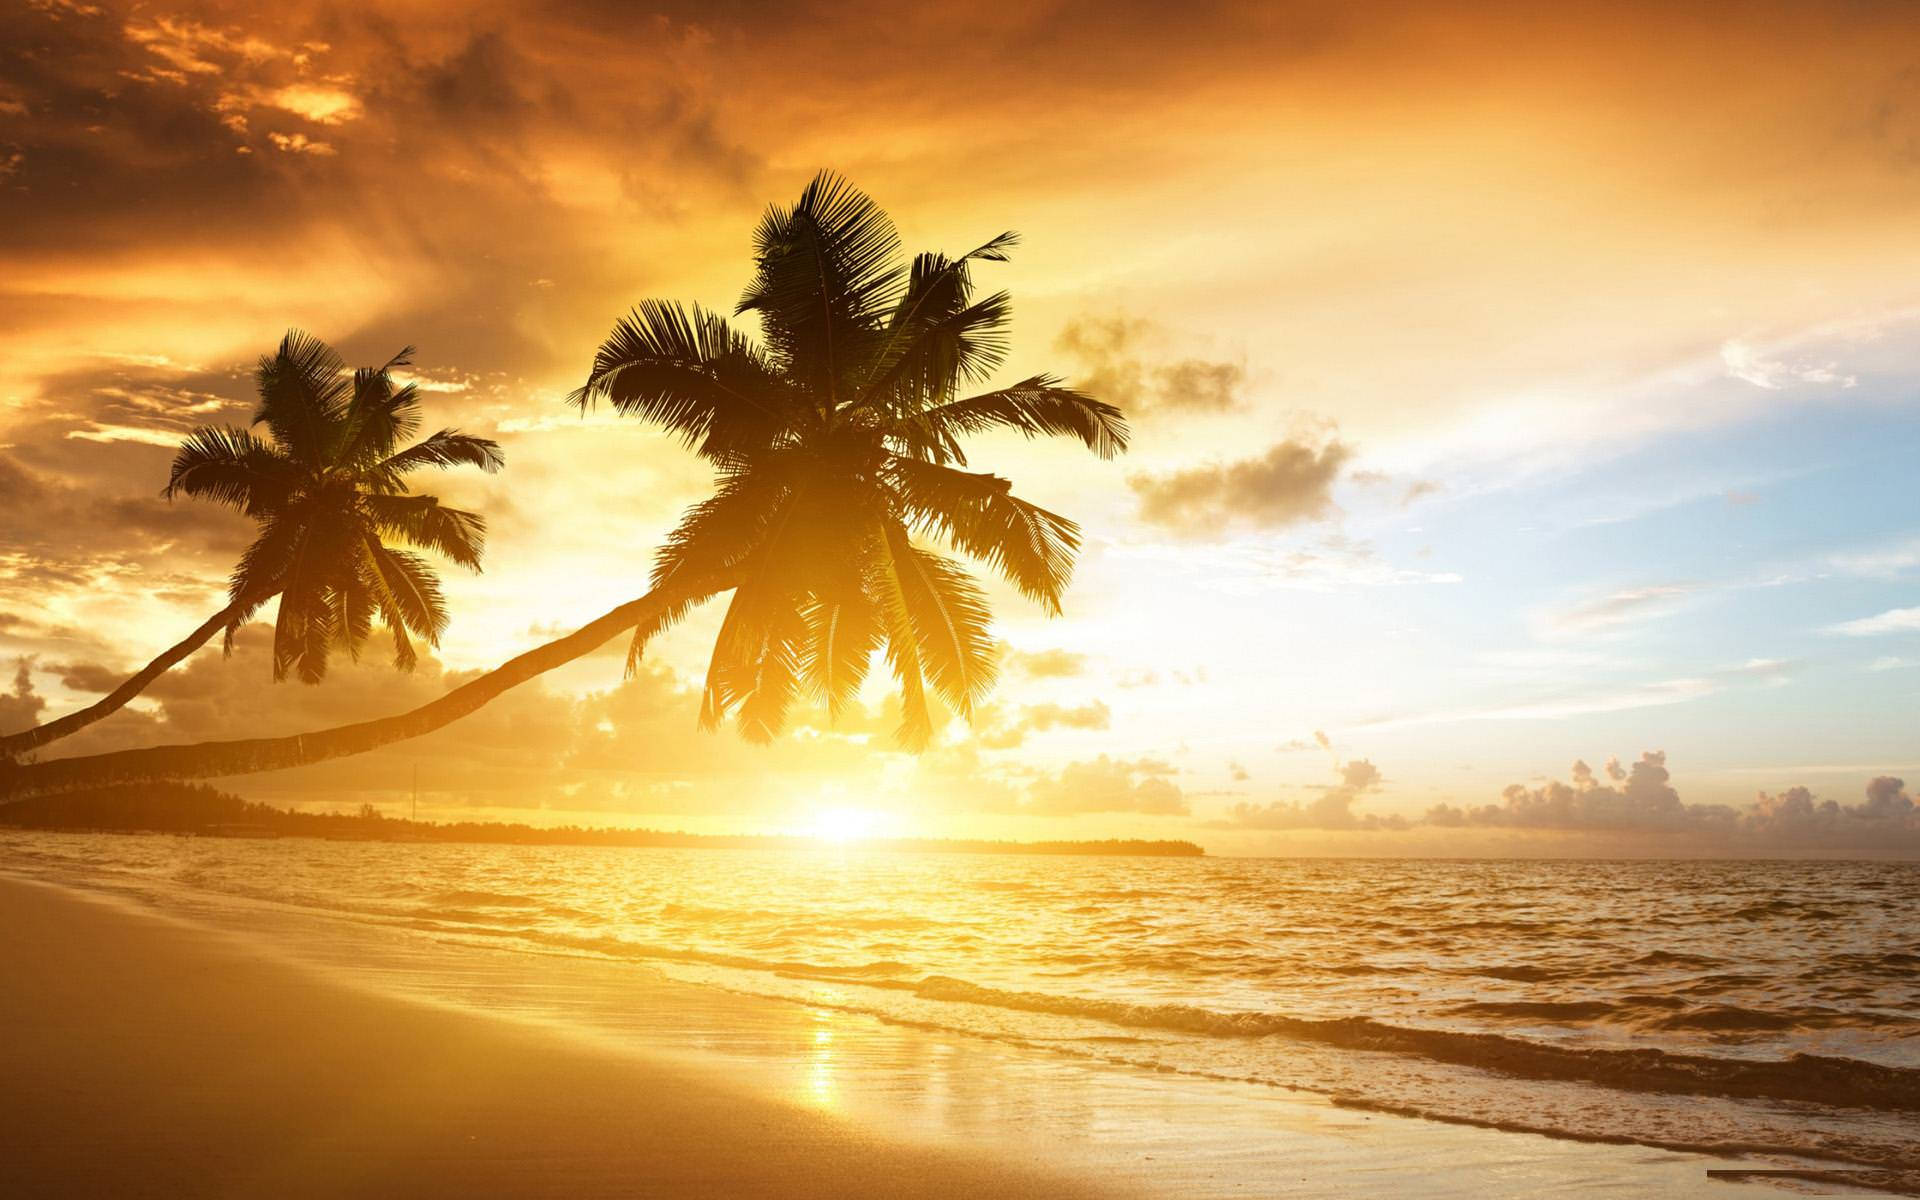 A sunset to remember on the beautiful golden beach Wallpaper